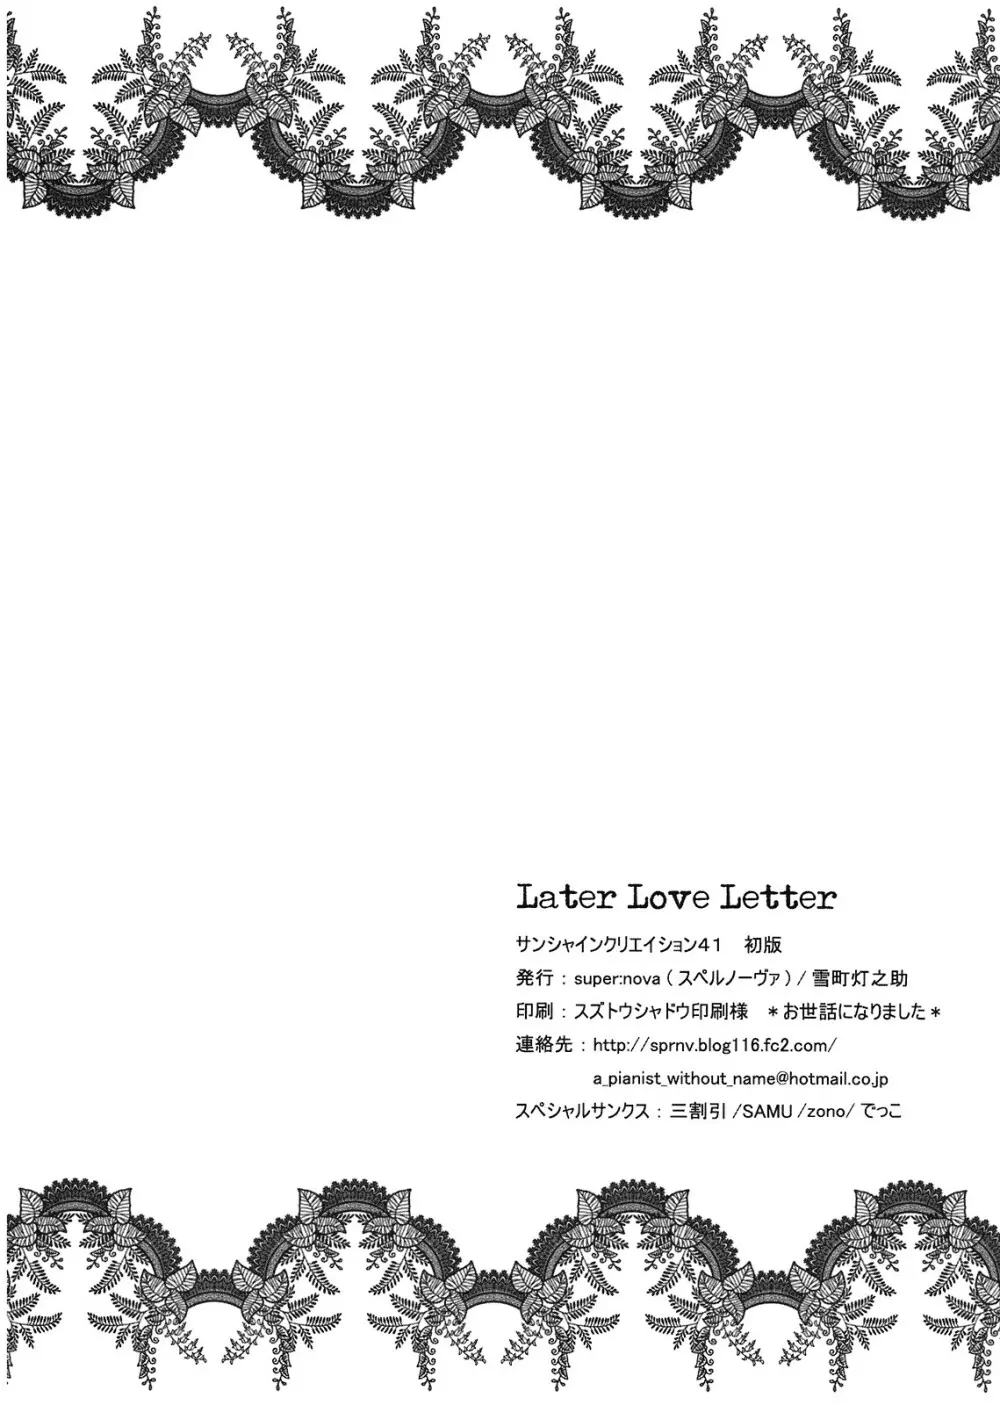 Later Love Letter 29ページ